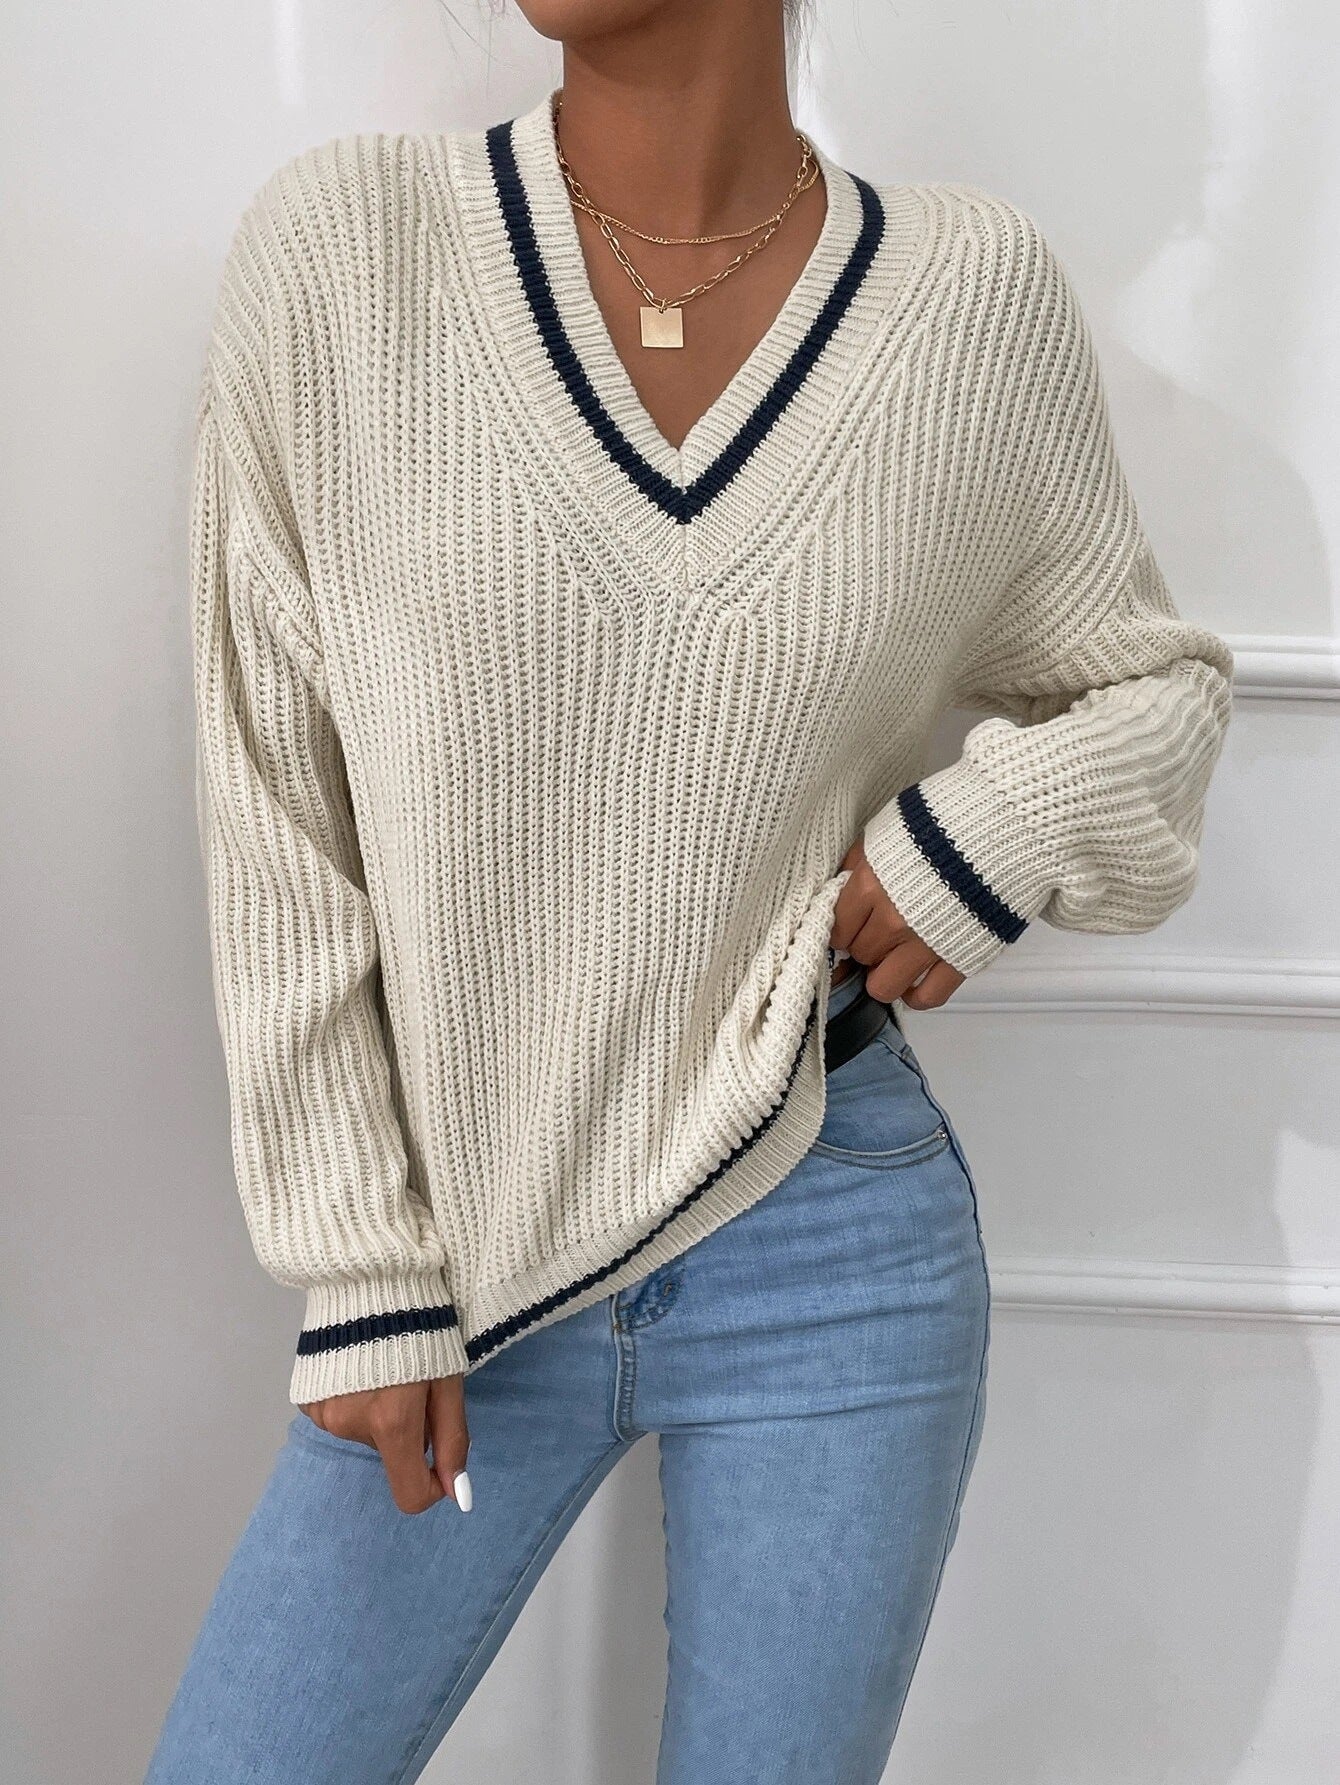 Winter Women's Clothes Cable Knit V Neck Sweaters Casual Long Sleeve Striped Pullover Sweater Trendy Loose Preppy Jumper Top